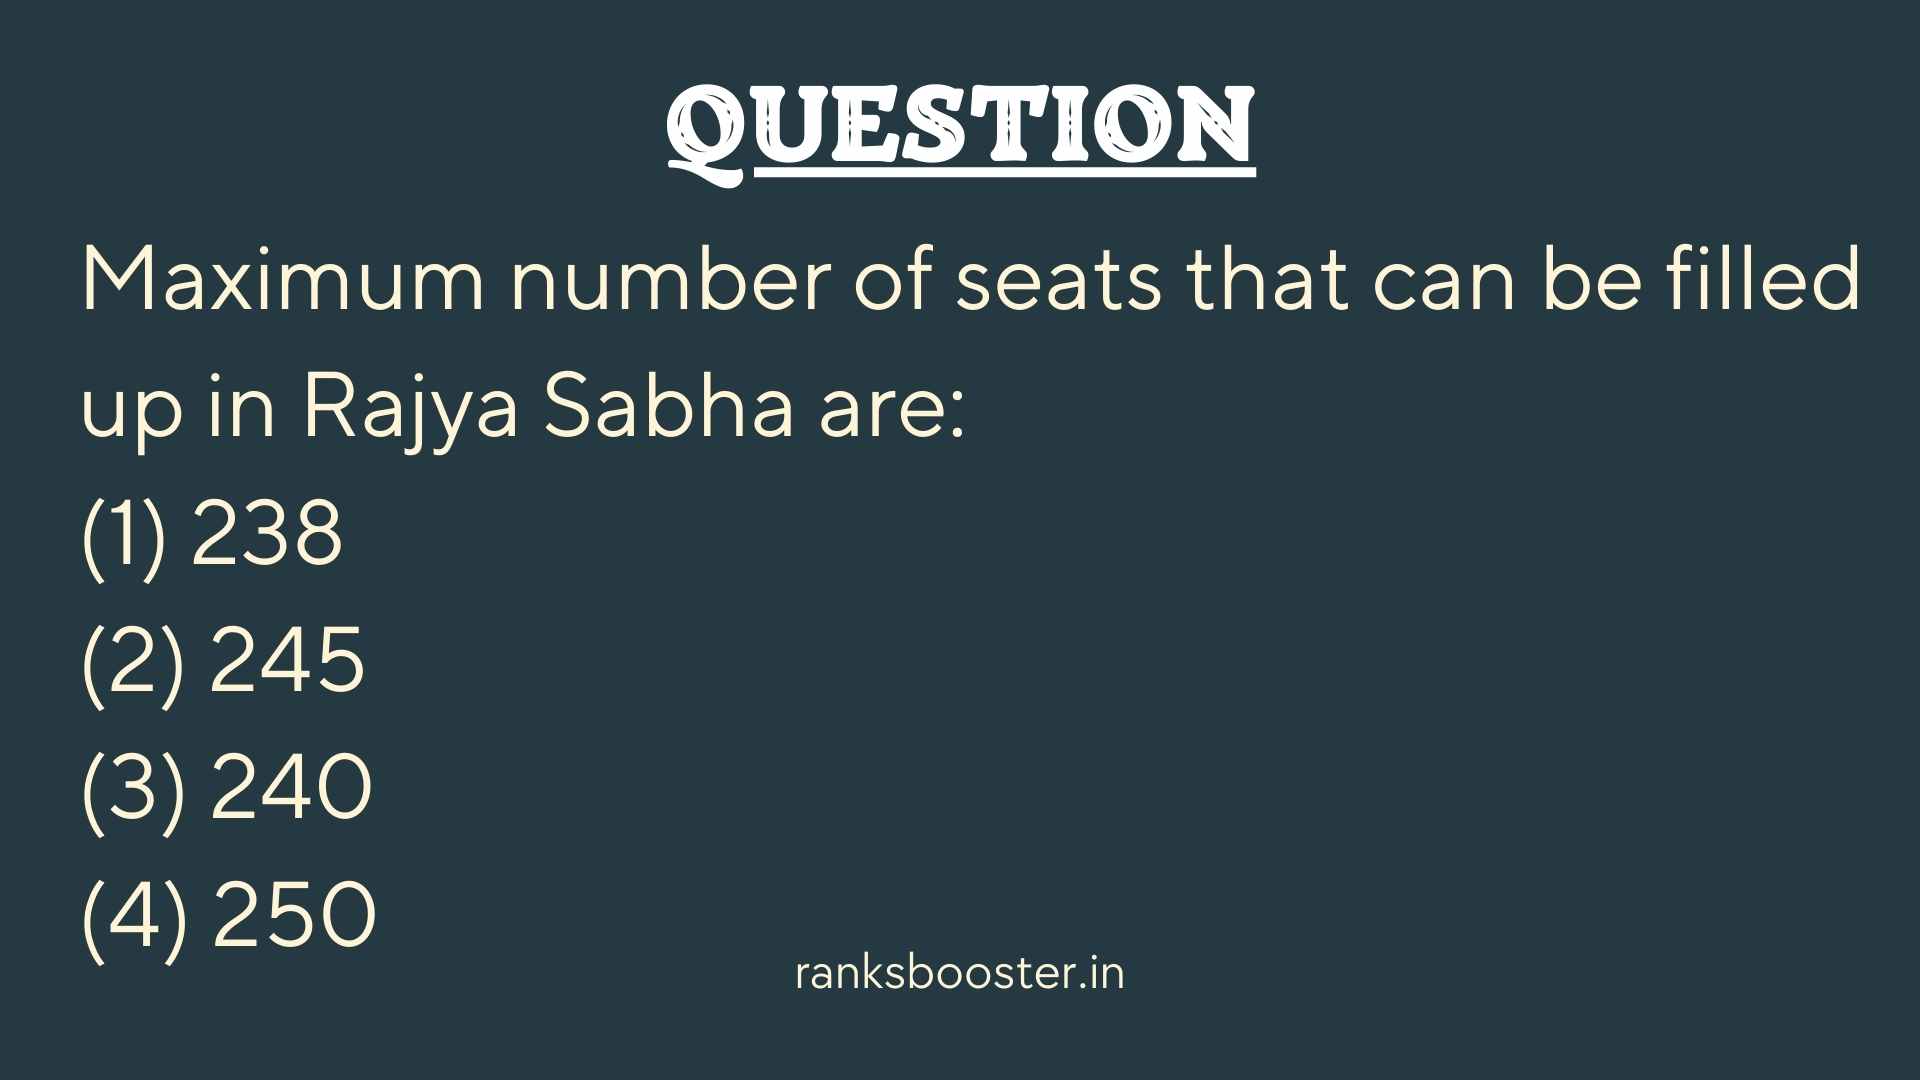 Maximum number of seats that can be filled up in Rajya Sabha are